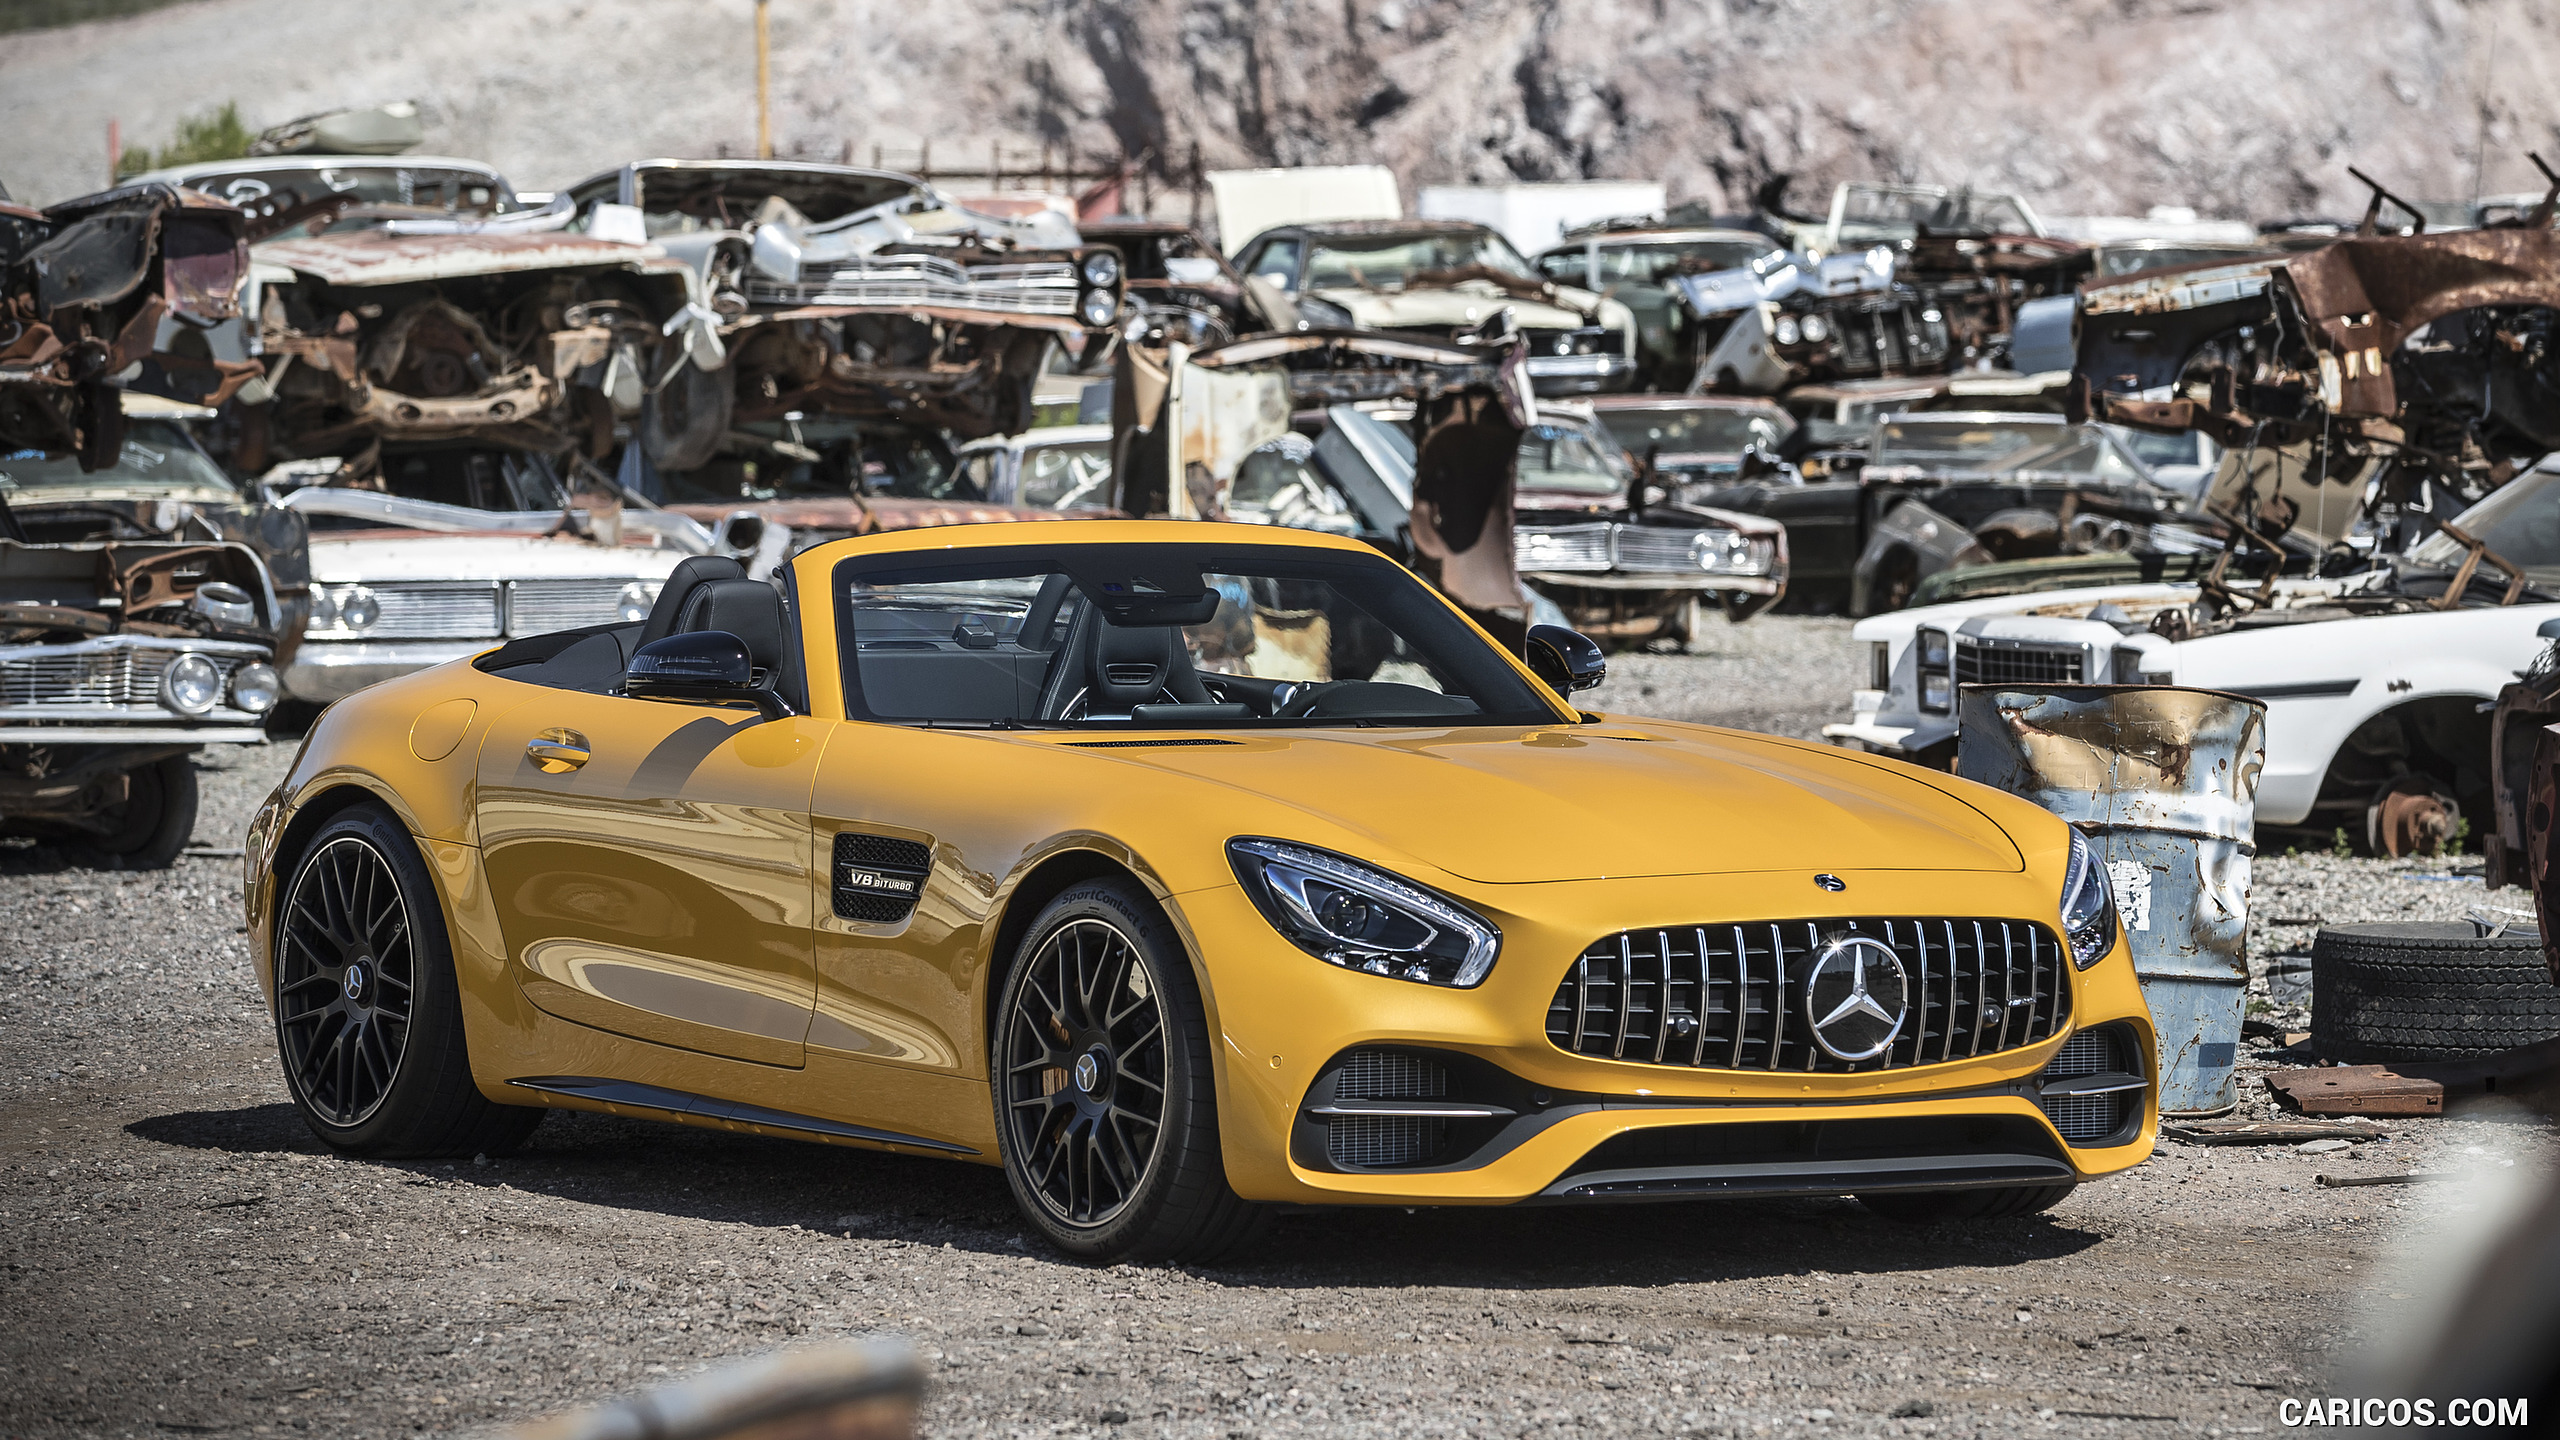 2018 Mercedes-AMG GT C Roadster - Front Three-Quarter, #212 of 350